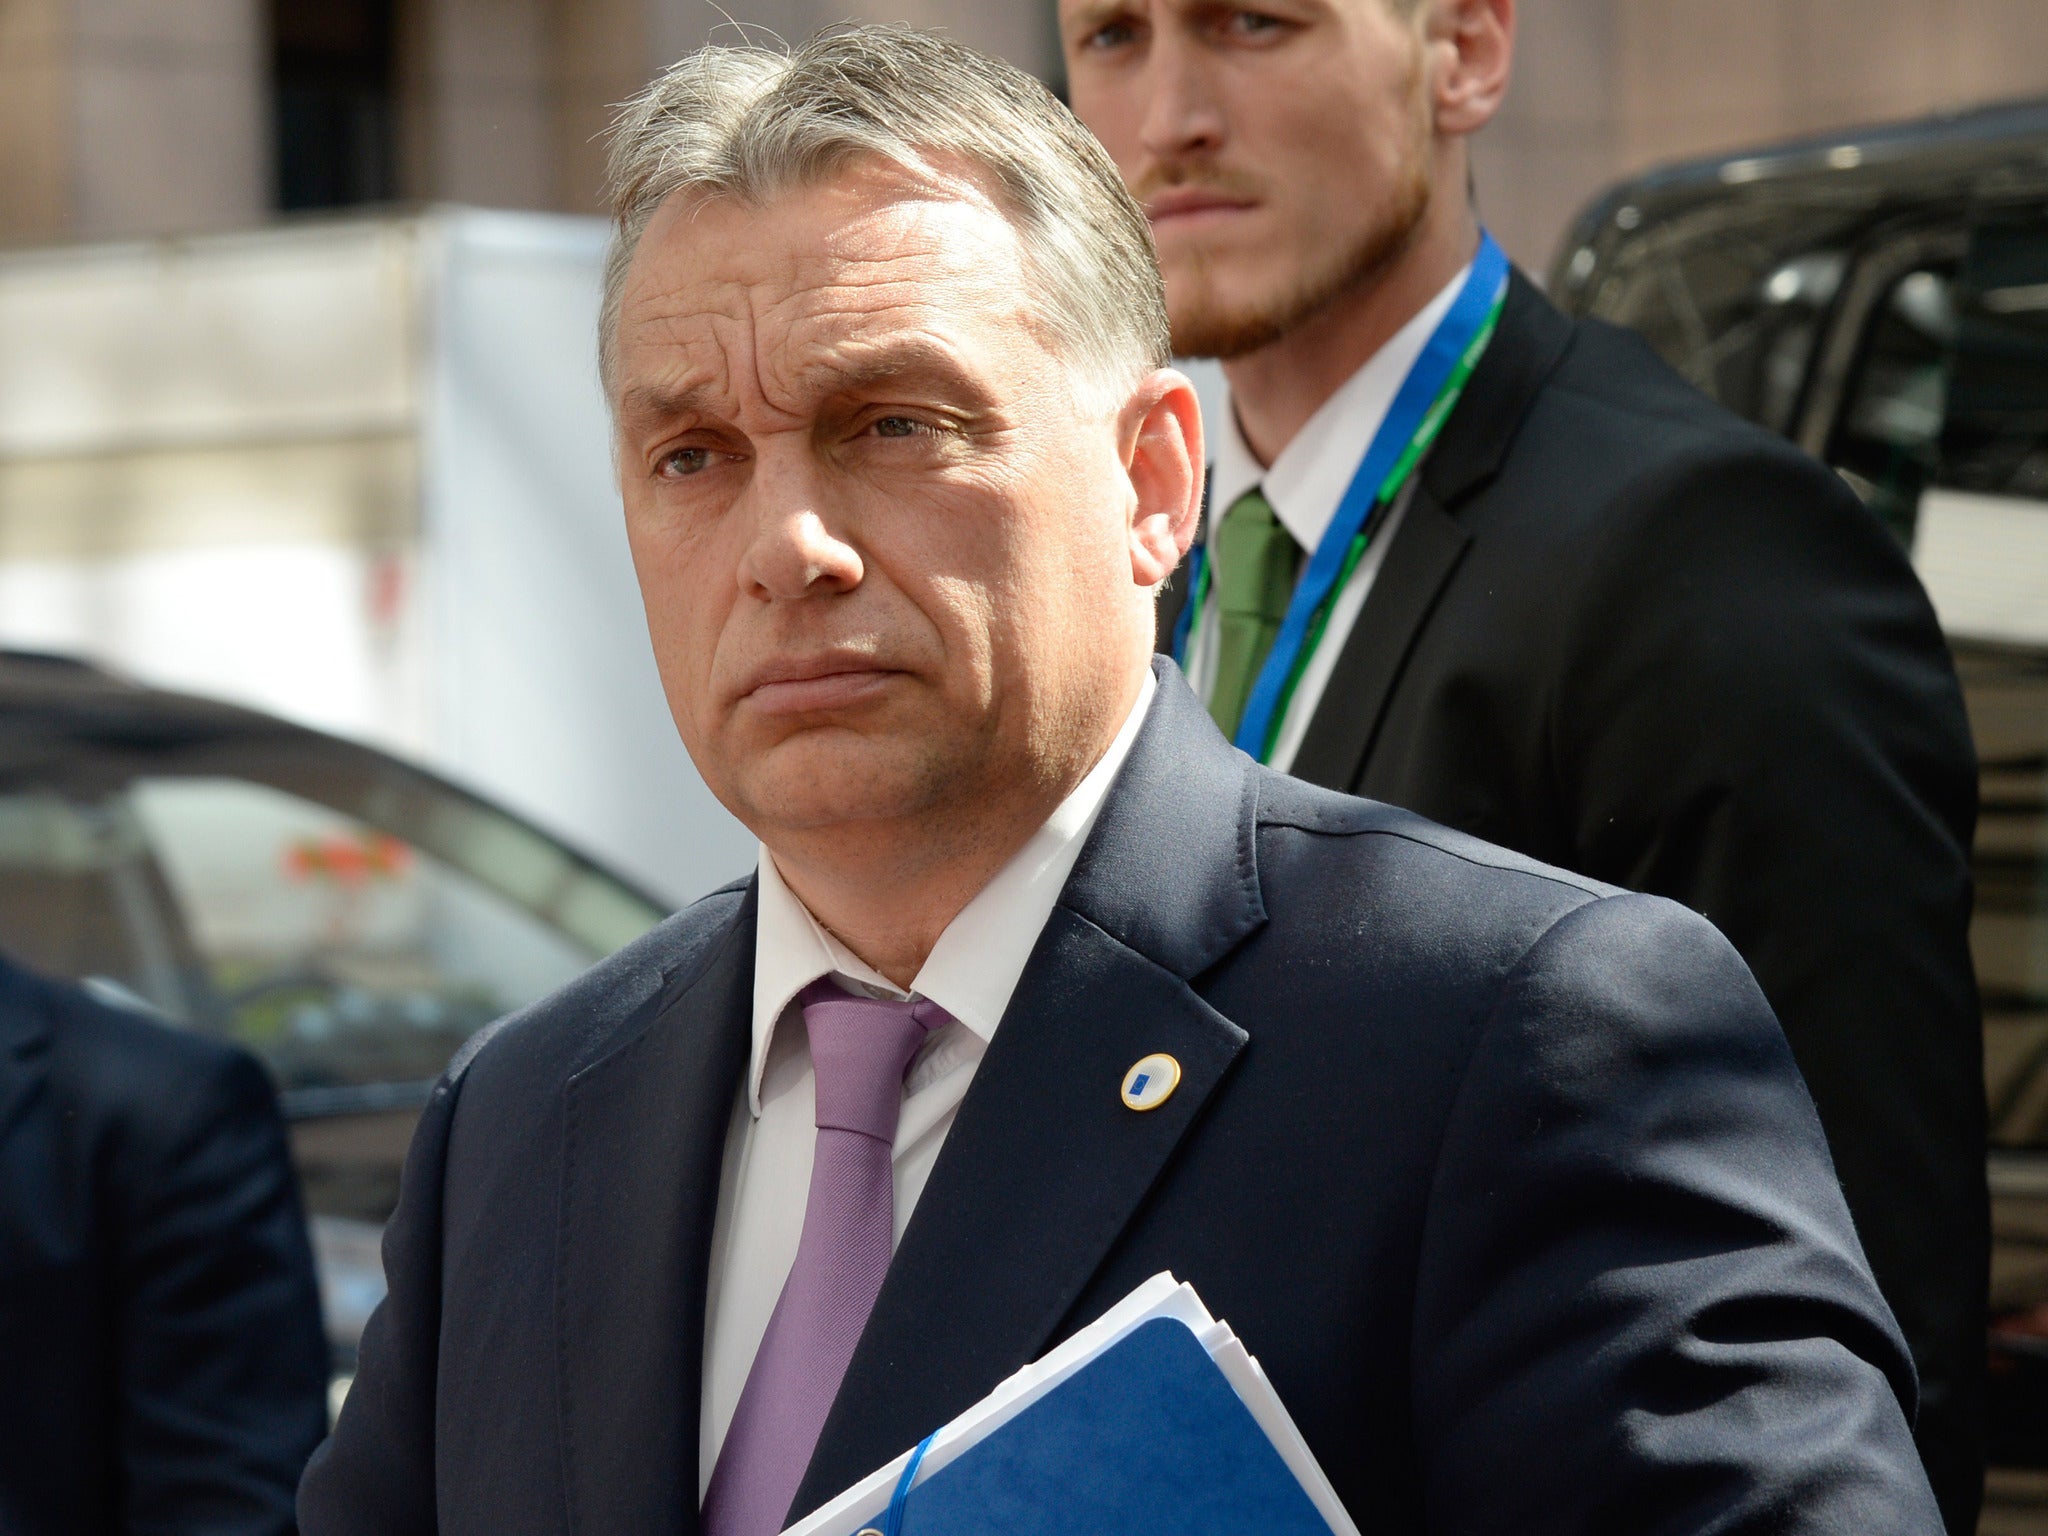 Mr Orban has several times antagonised his EU colleagues over the refugee crisis